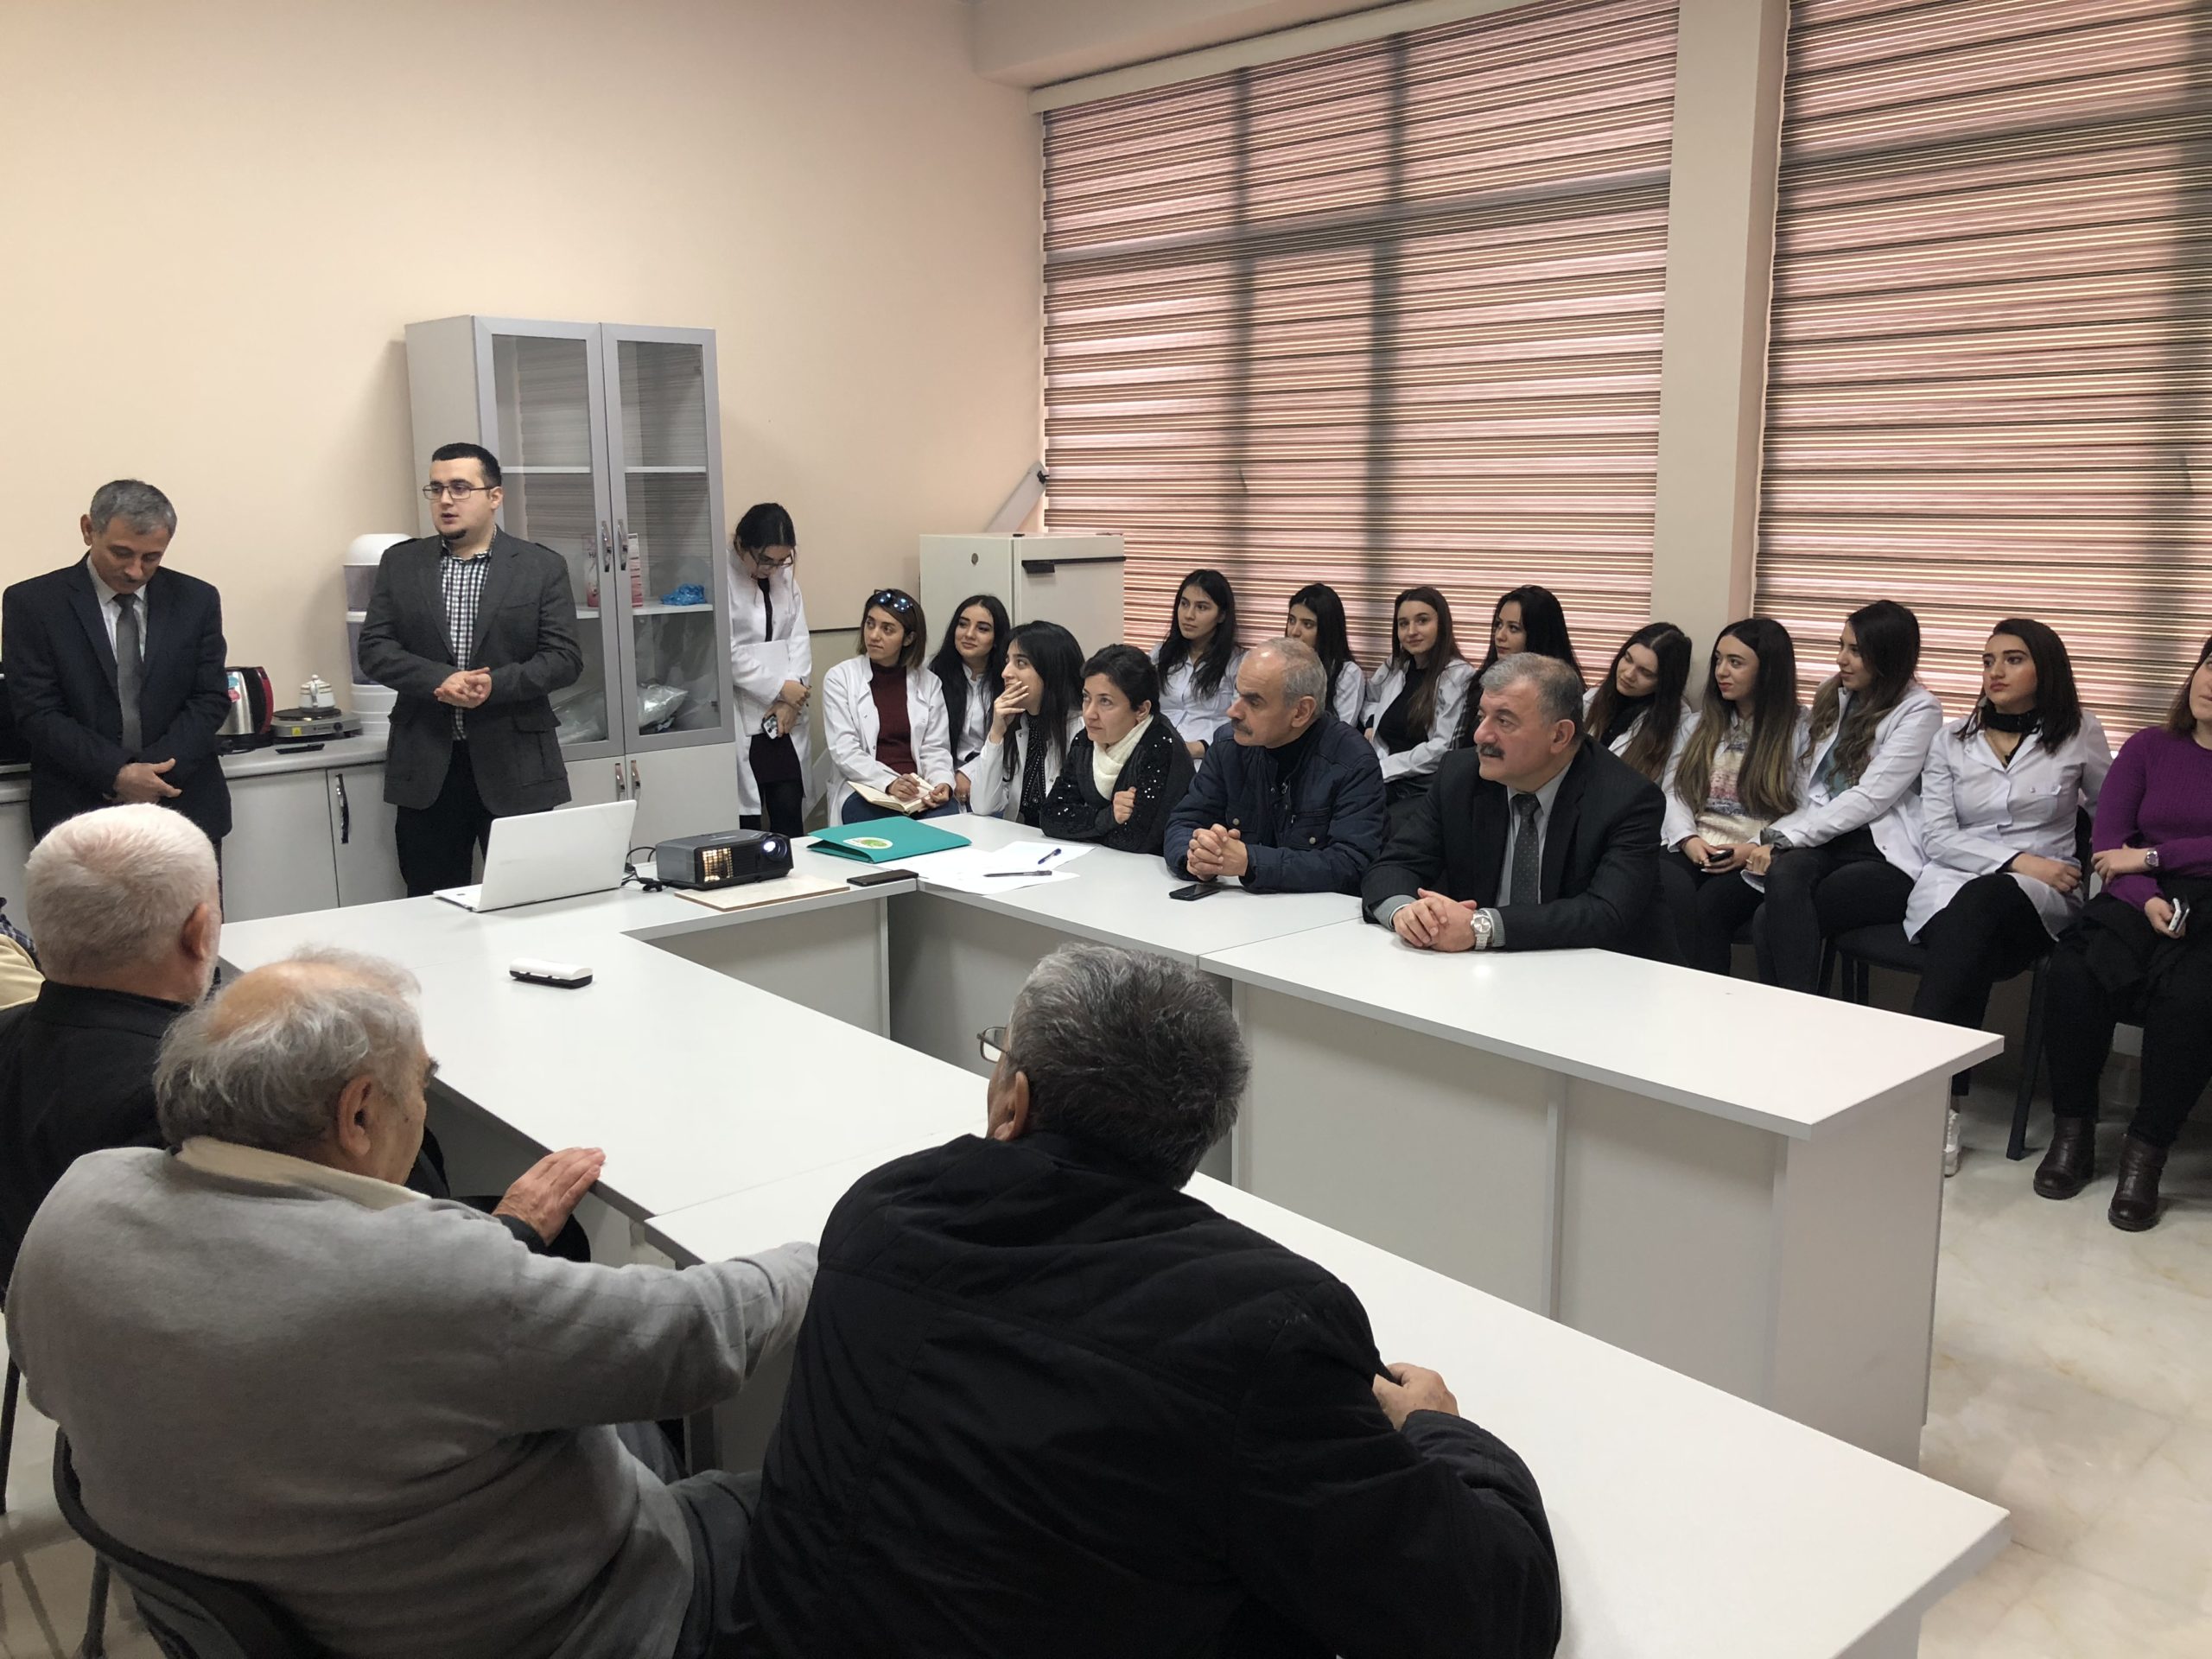 A seminar on “Modified wet-spun polycaprolactone fibers for controlled drug release, improved cell adhesion, and proliferation” was held